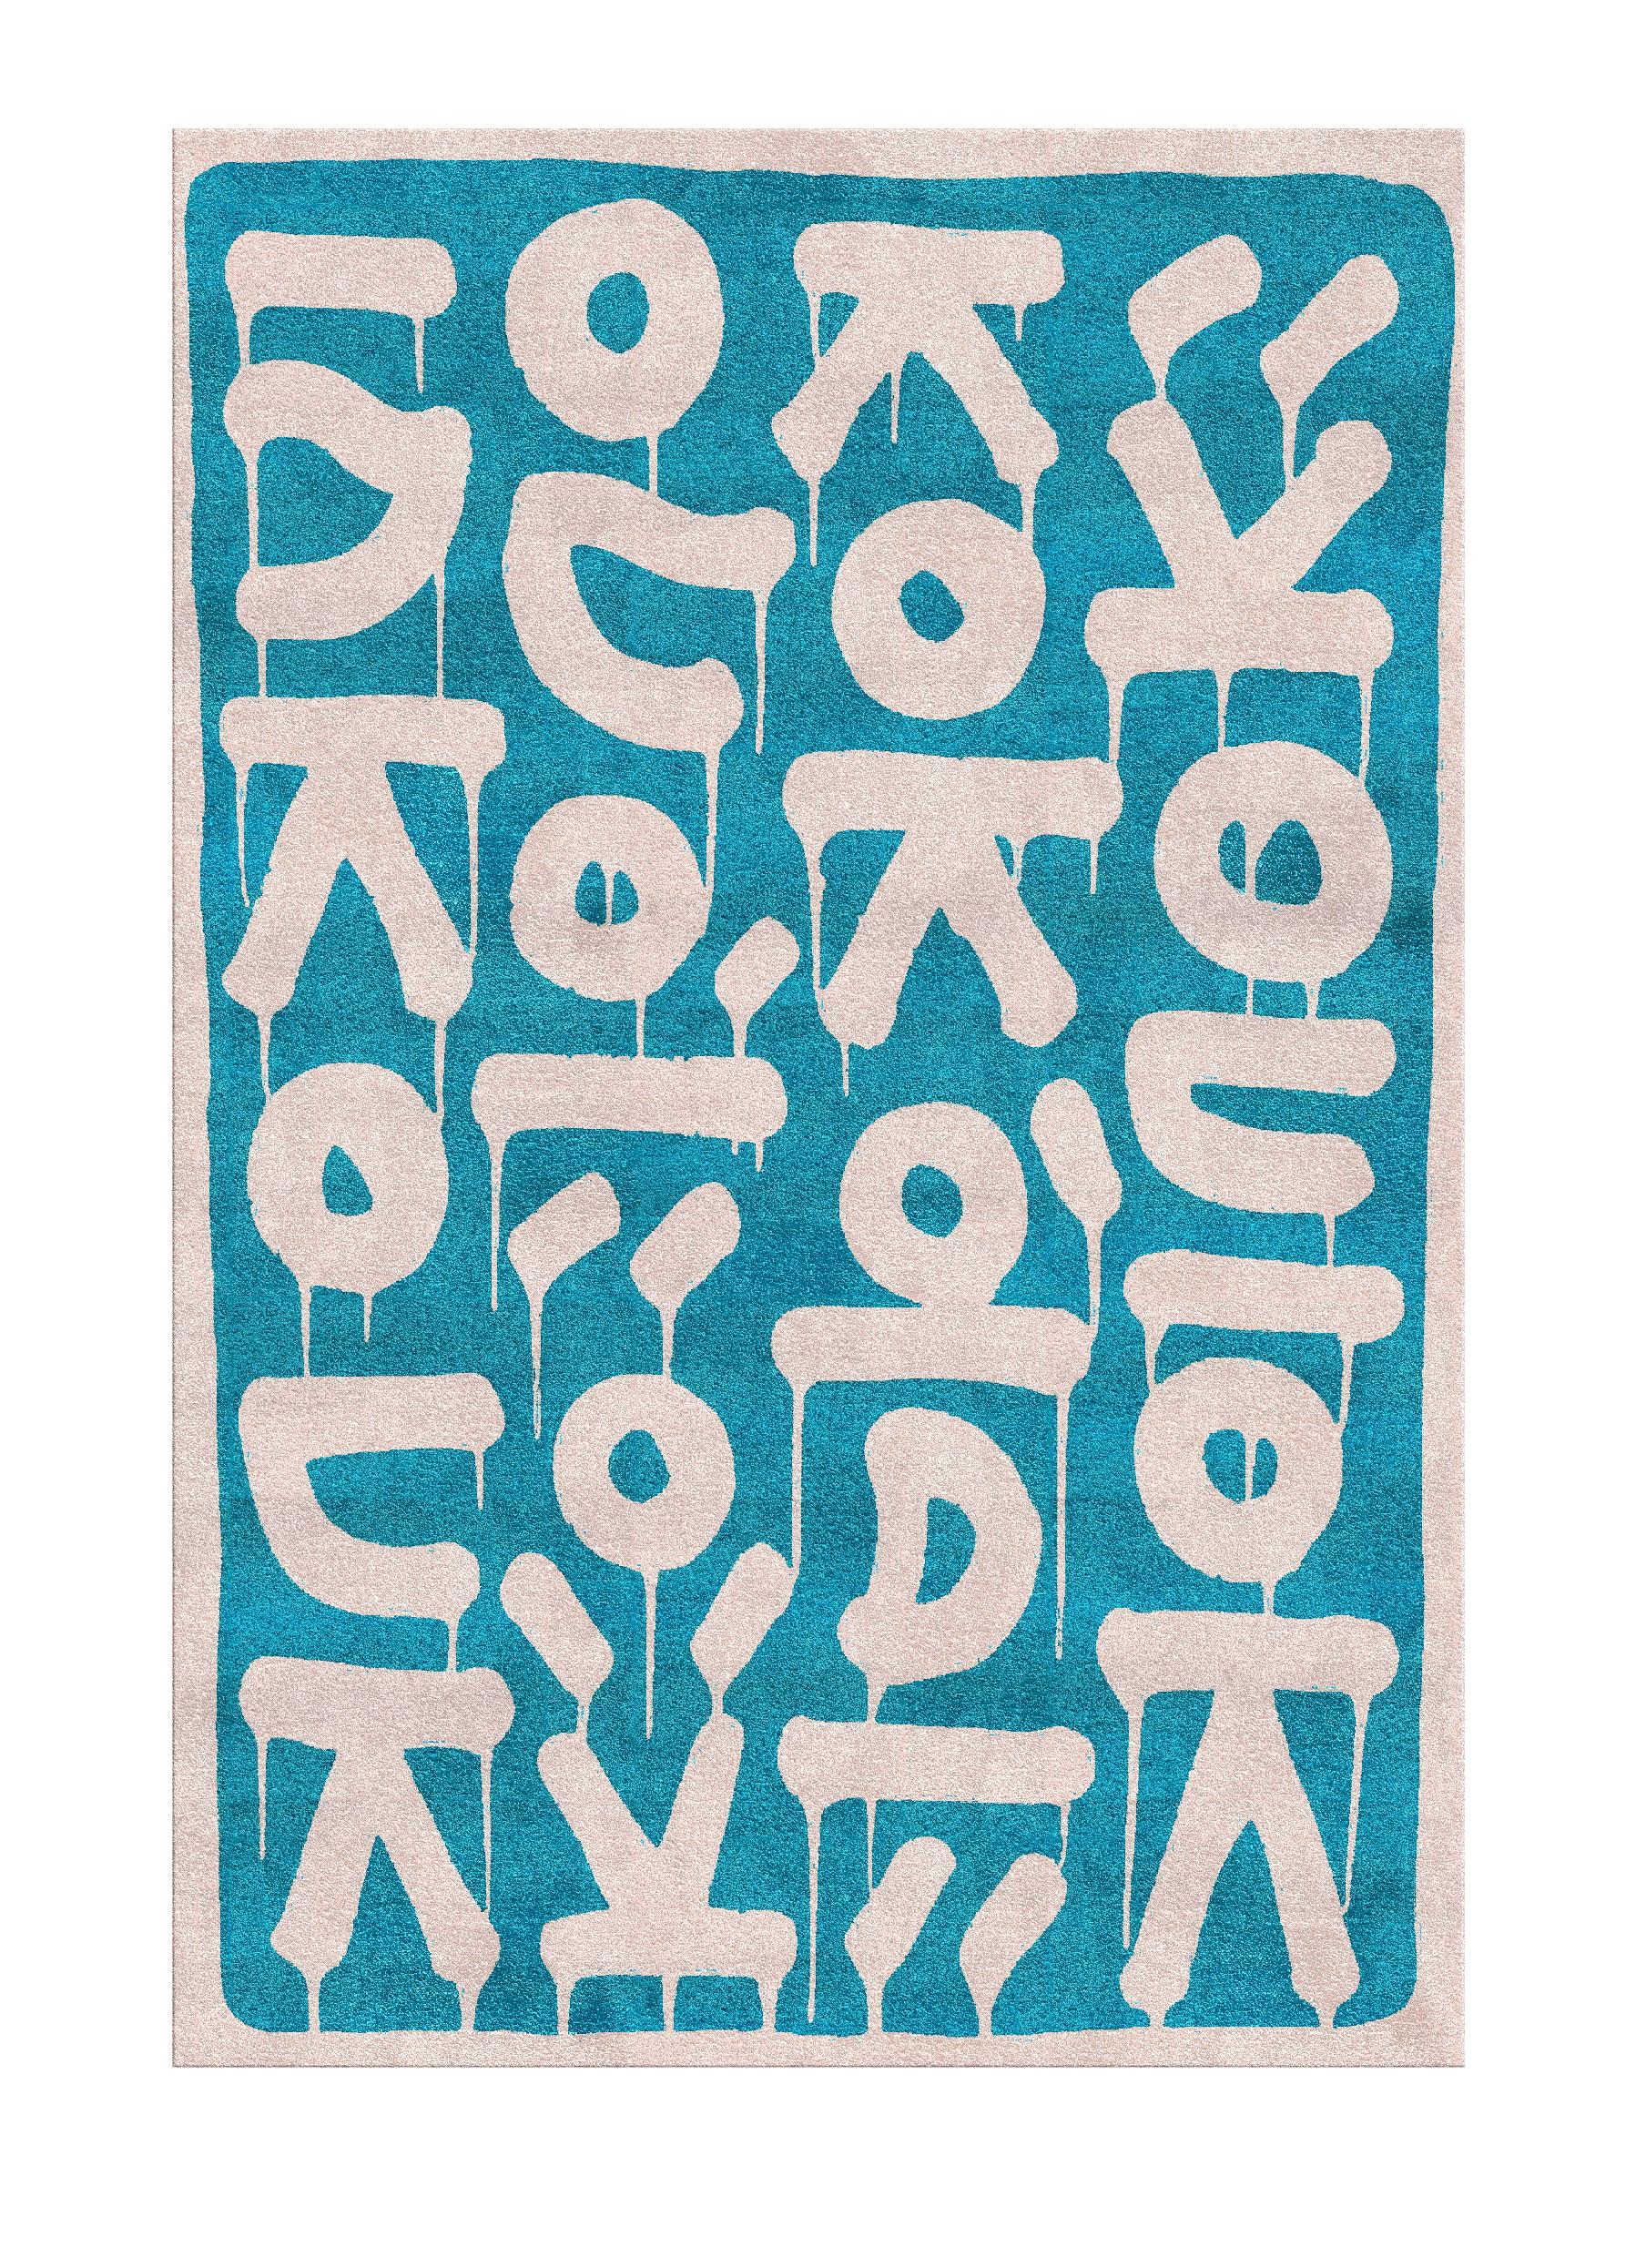 Letter rug I by Raul.
Dimensions: D 300 x W 200 cm
Materials: Viscose, linen
Available in other colors.

The ‘Letter’ rug comes from a series entitled “Nomadic signs” representing all the signs and symbols encountered by the artist during his